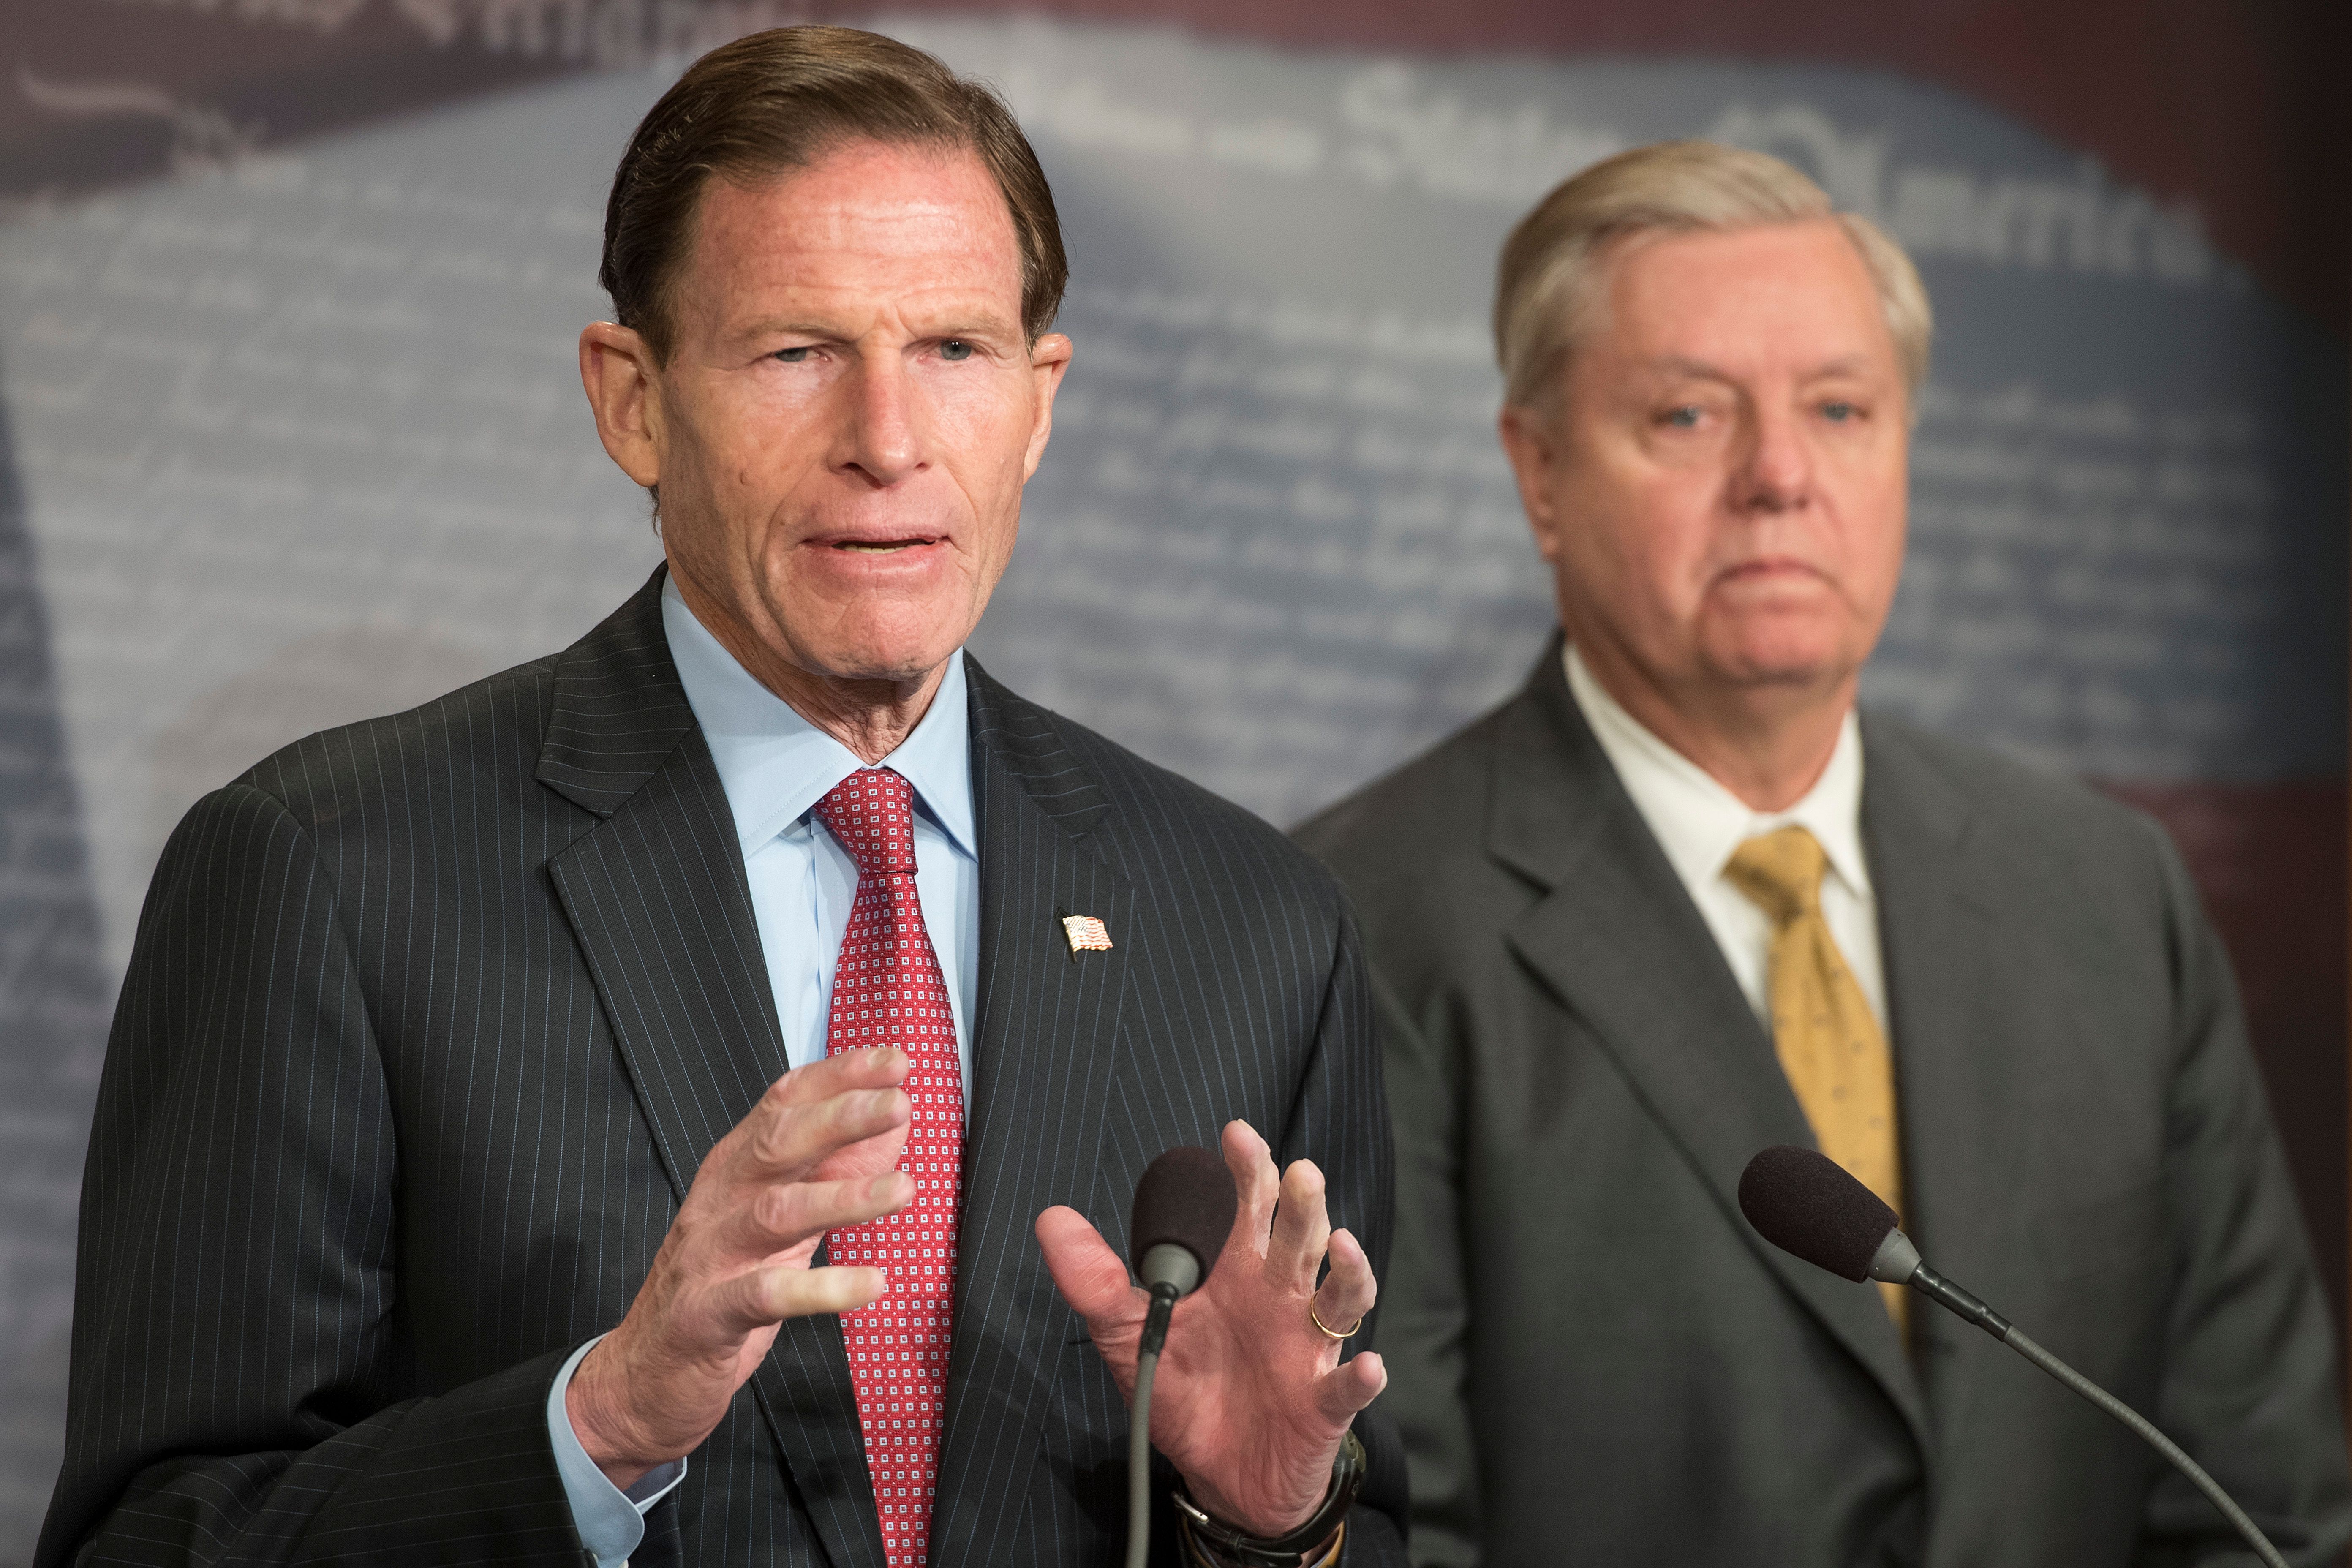 US Senator Lindsey Graham (R), R-South Carolina, and US Senator Richard Blumenthal (L), D-Connecticut, explain Extreme Risk Protection Orders on Capitol Hill in Washington, DC, on March 8, 2018. (JIM WATSON/AFP/Getty Images)